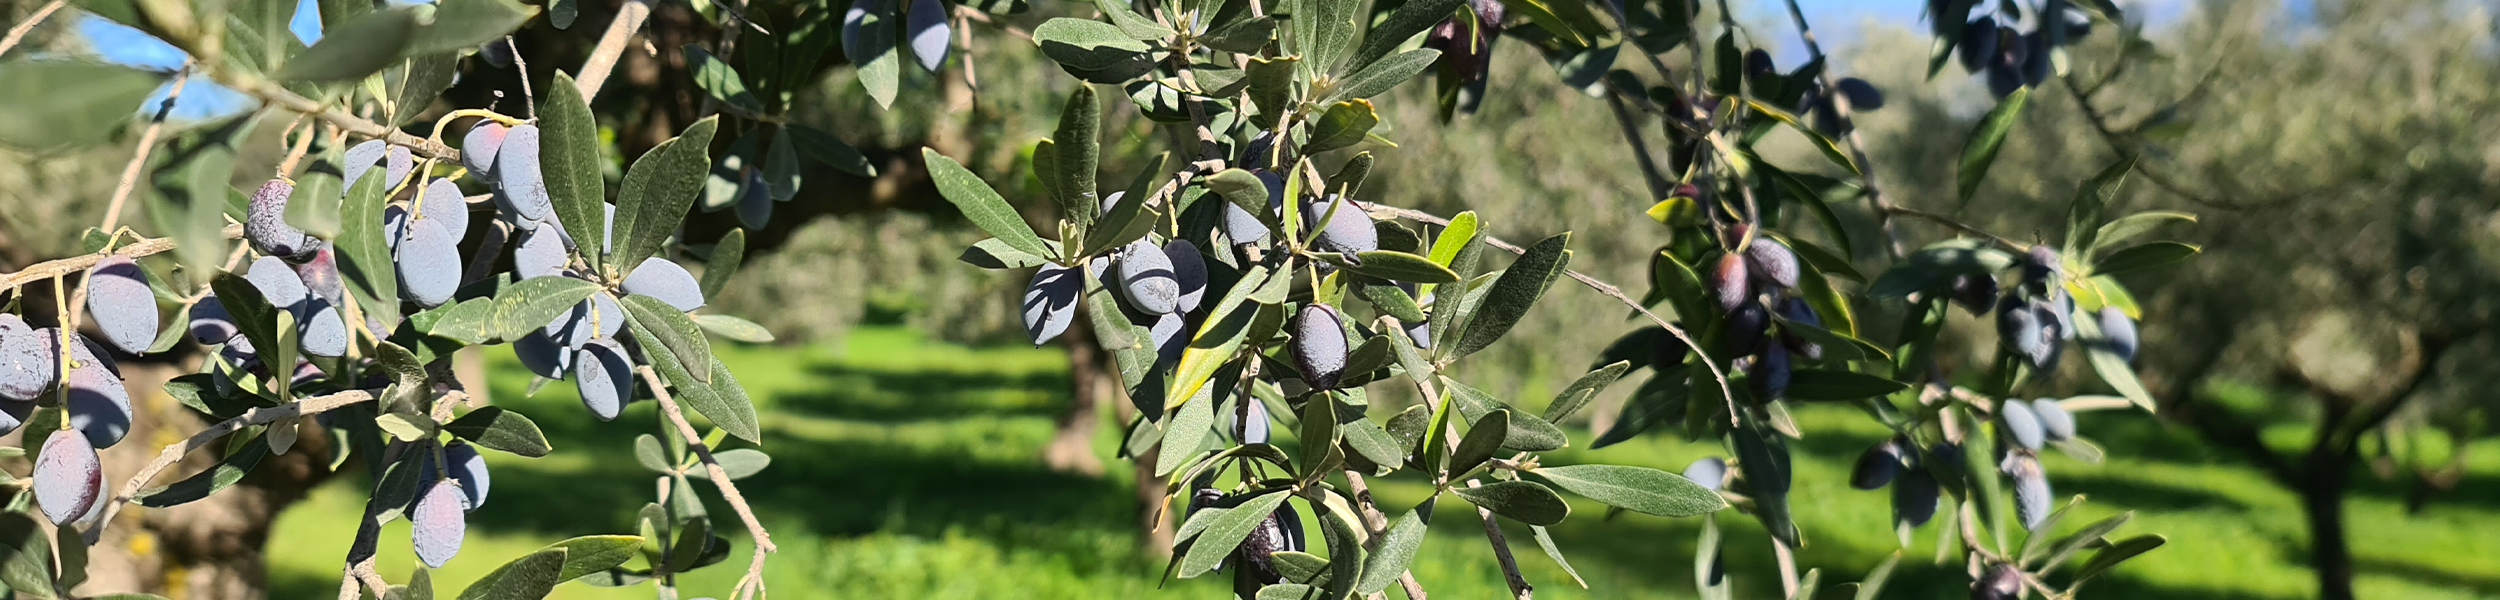 olive groves nakopoulou contact us